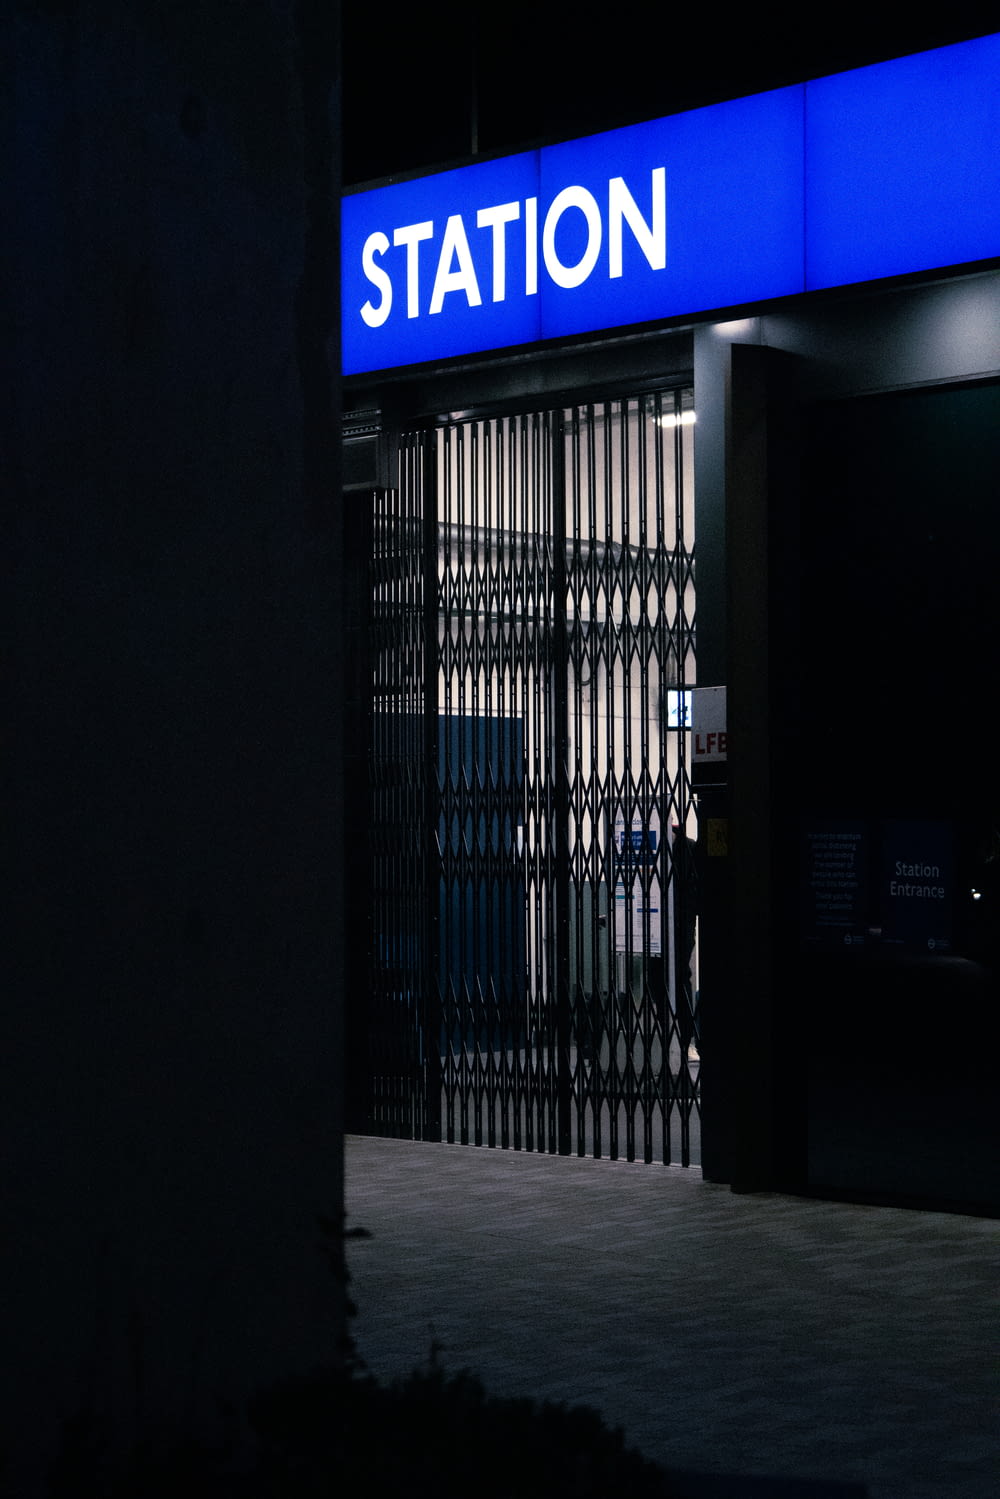 black metal gate near blue and white signage